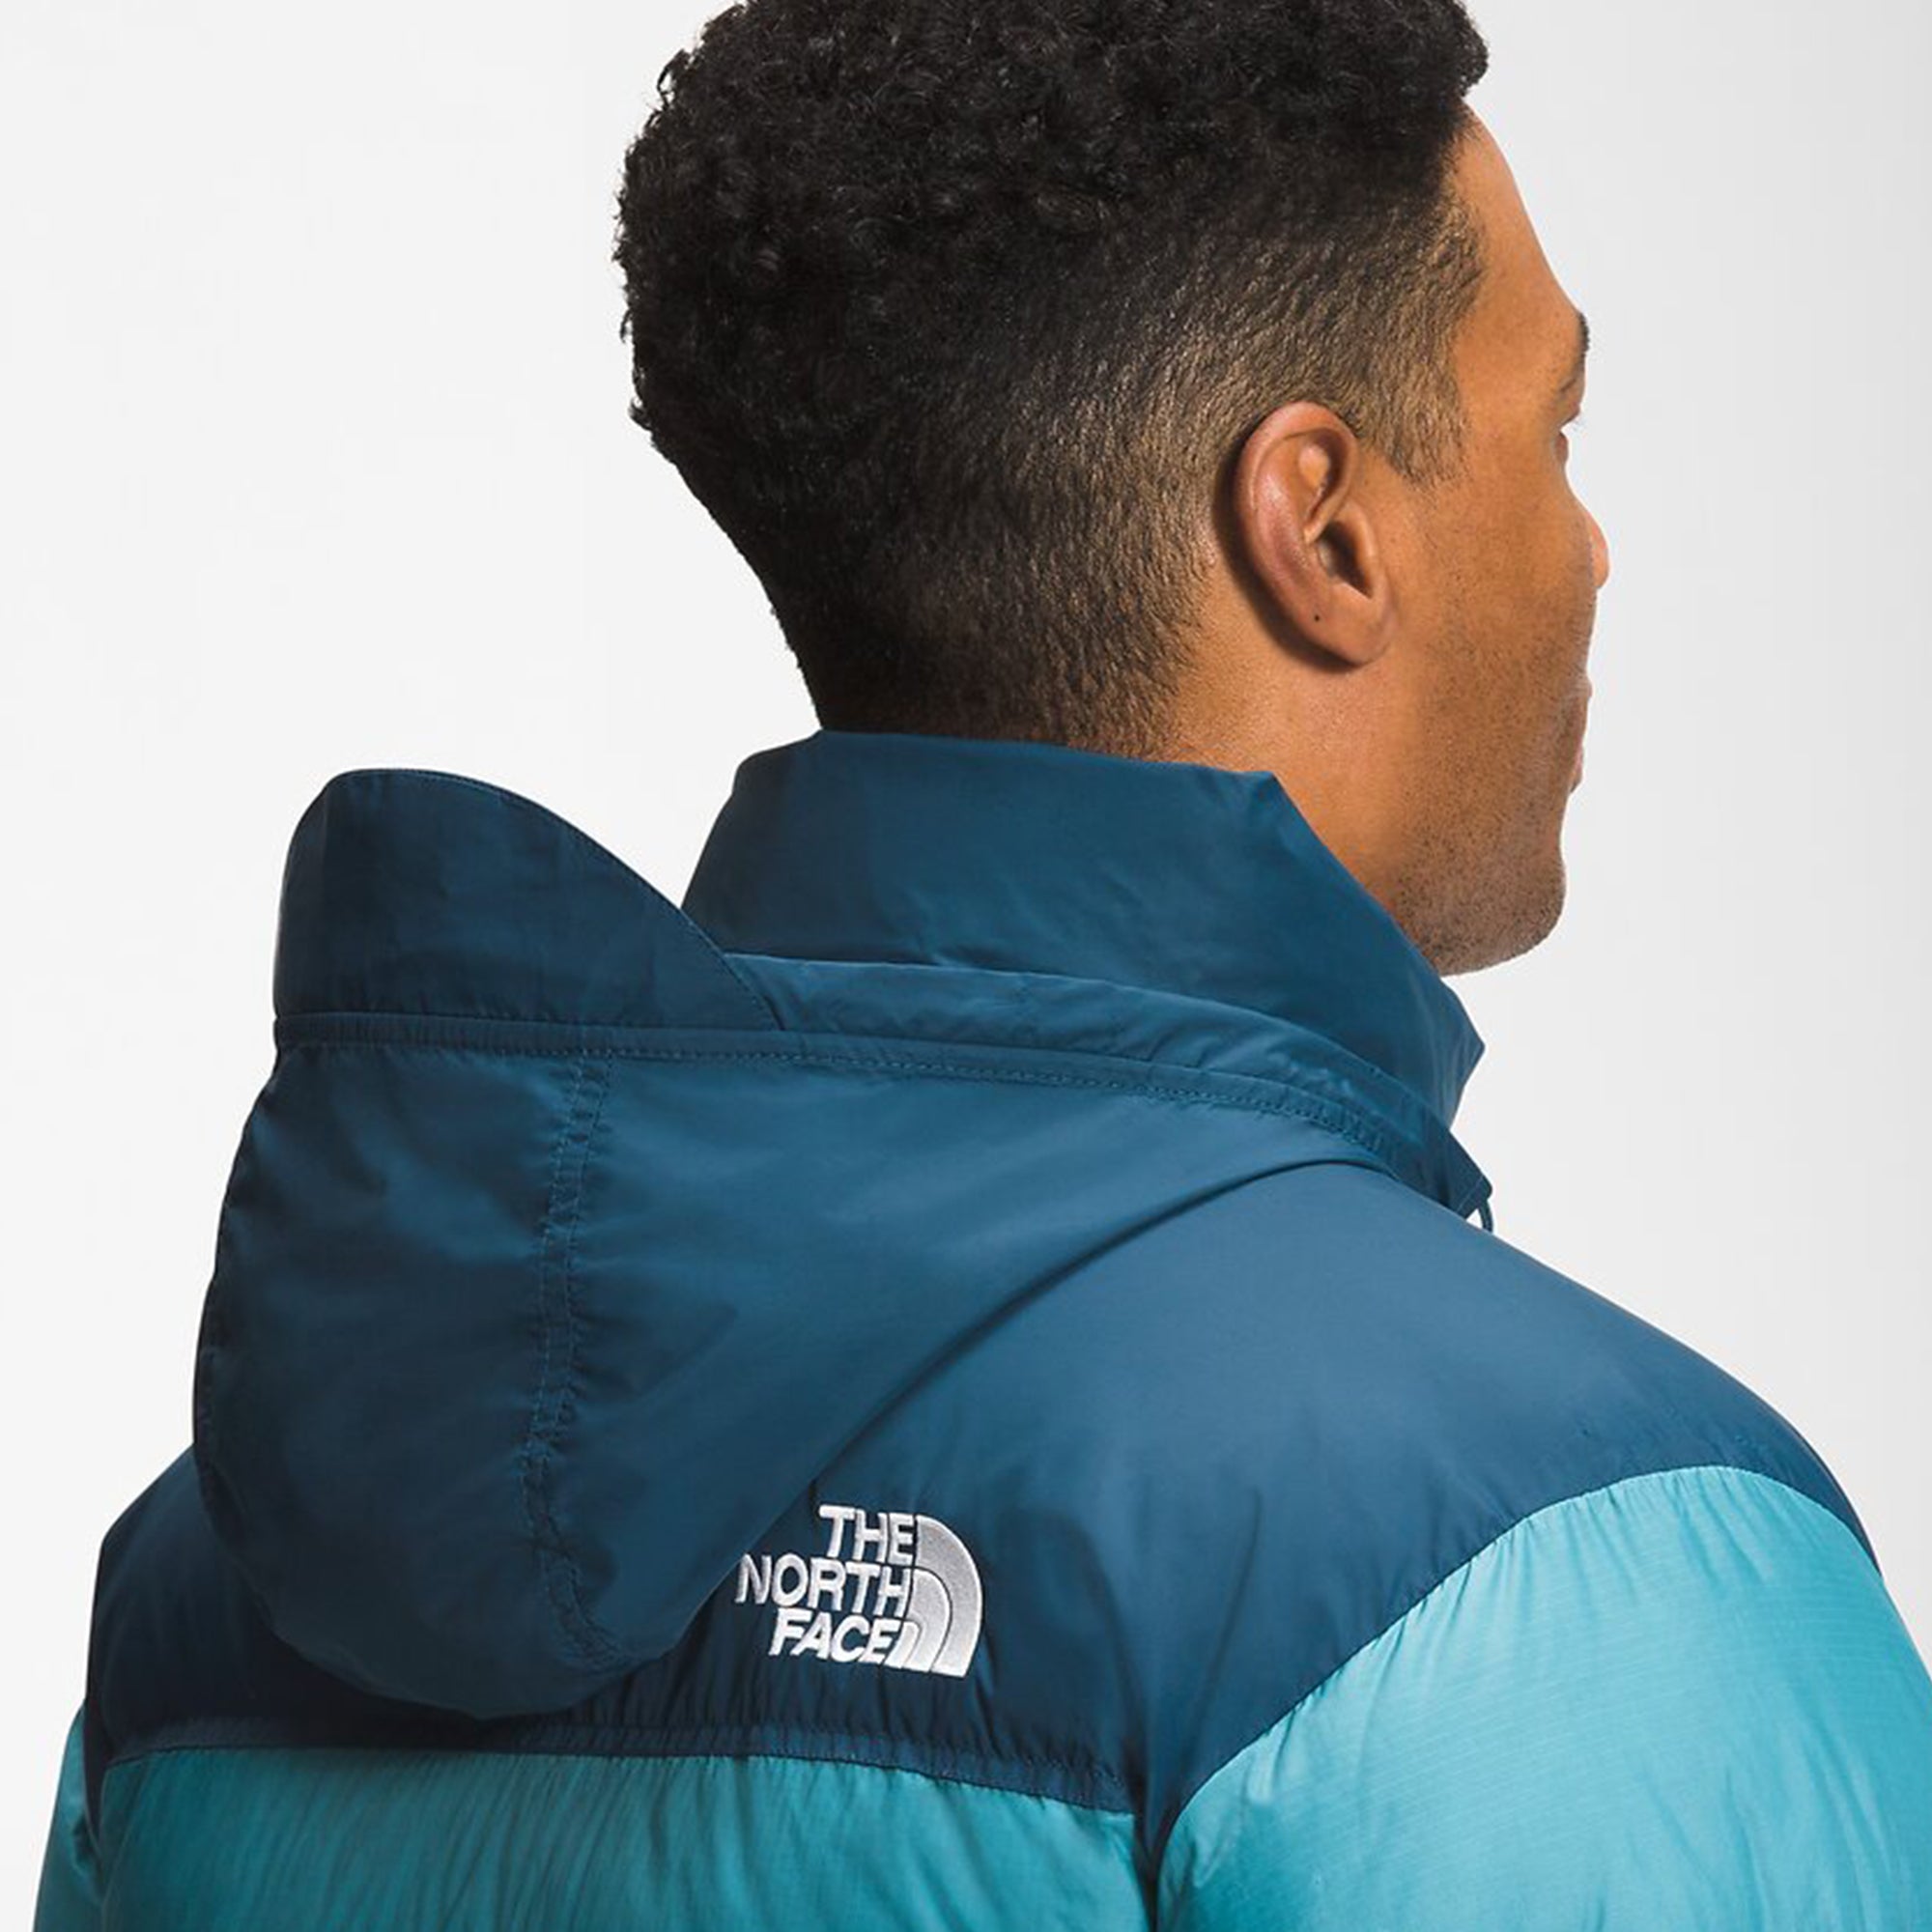 The North Face Mens 1996 Retro Npse Jacket 'Storm Blue'